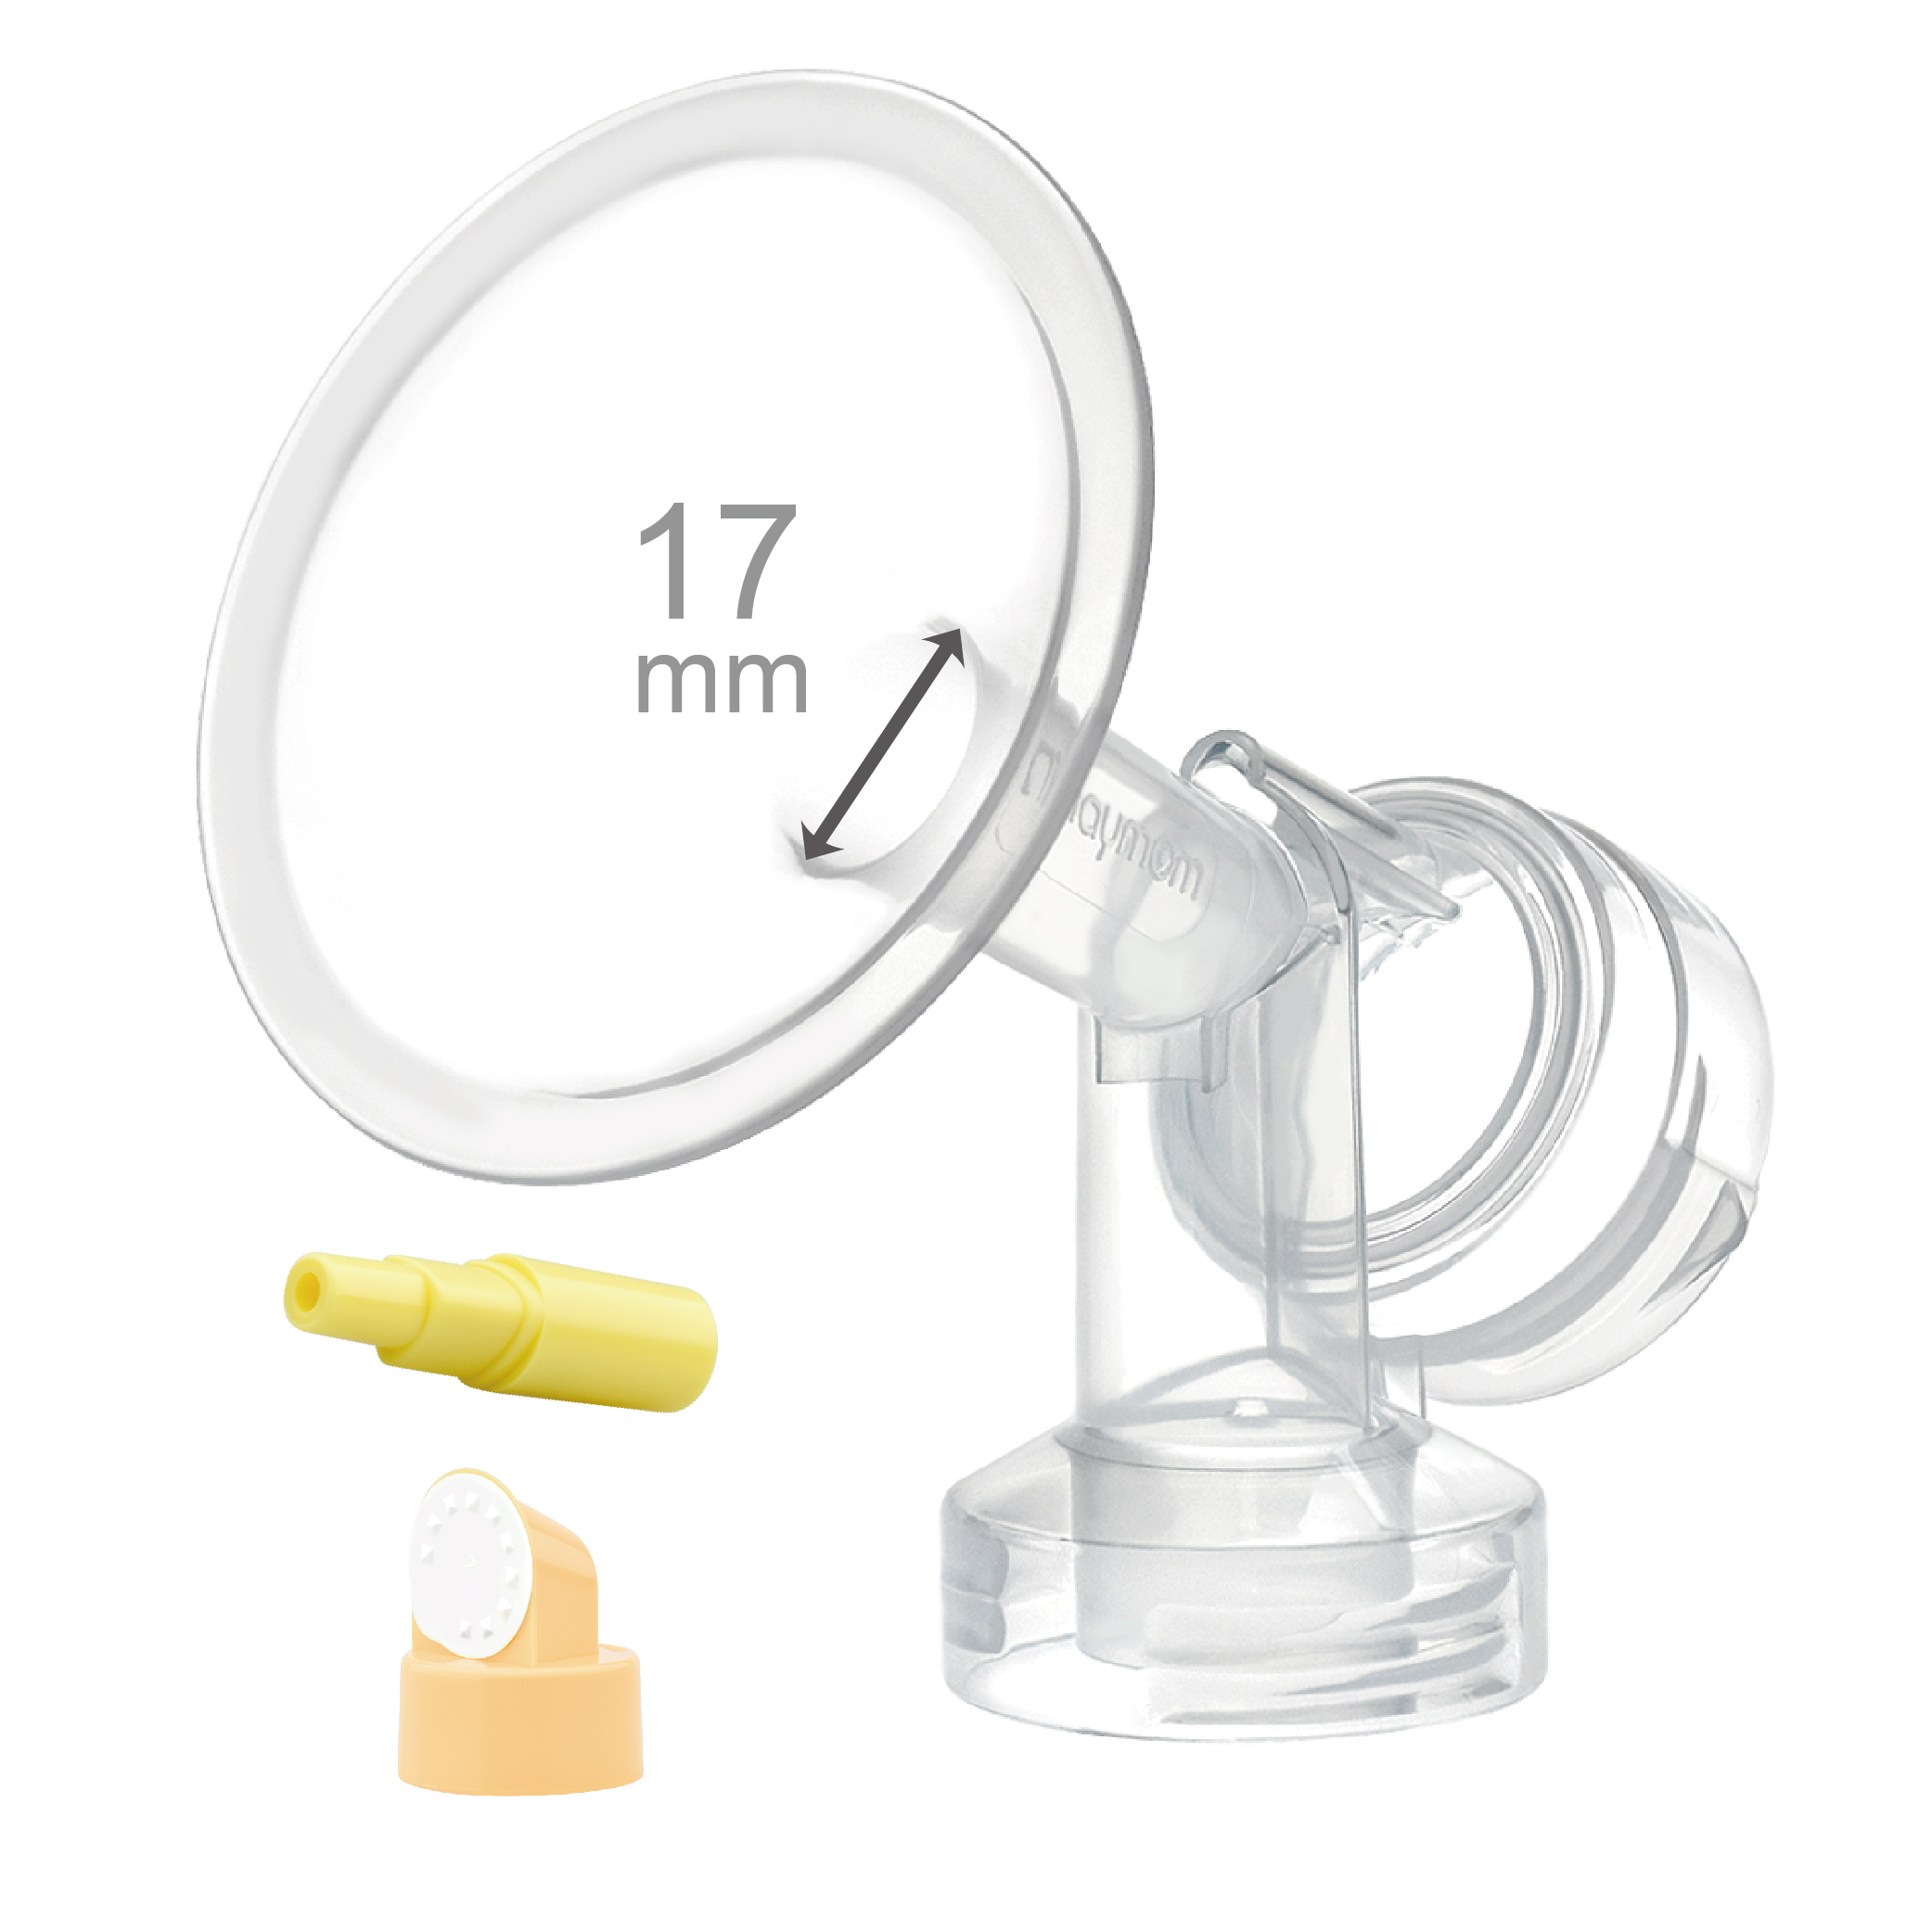 (image for) 17 mm Extra Small Flange w/ Valve and Membrane for SpeCtra Breast Pumps S1, S2, M1, Spectra 9; Narrow (Standard) Bottle Neck; 1 pc